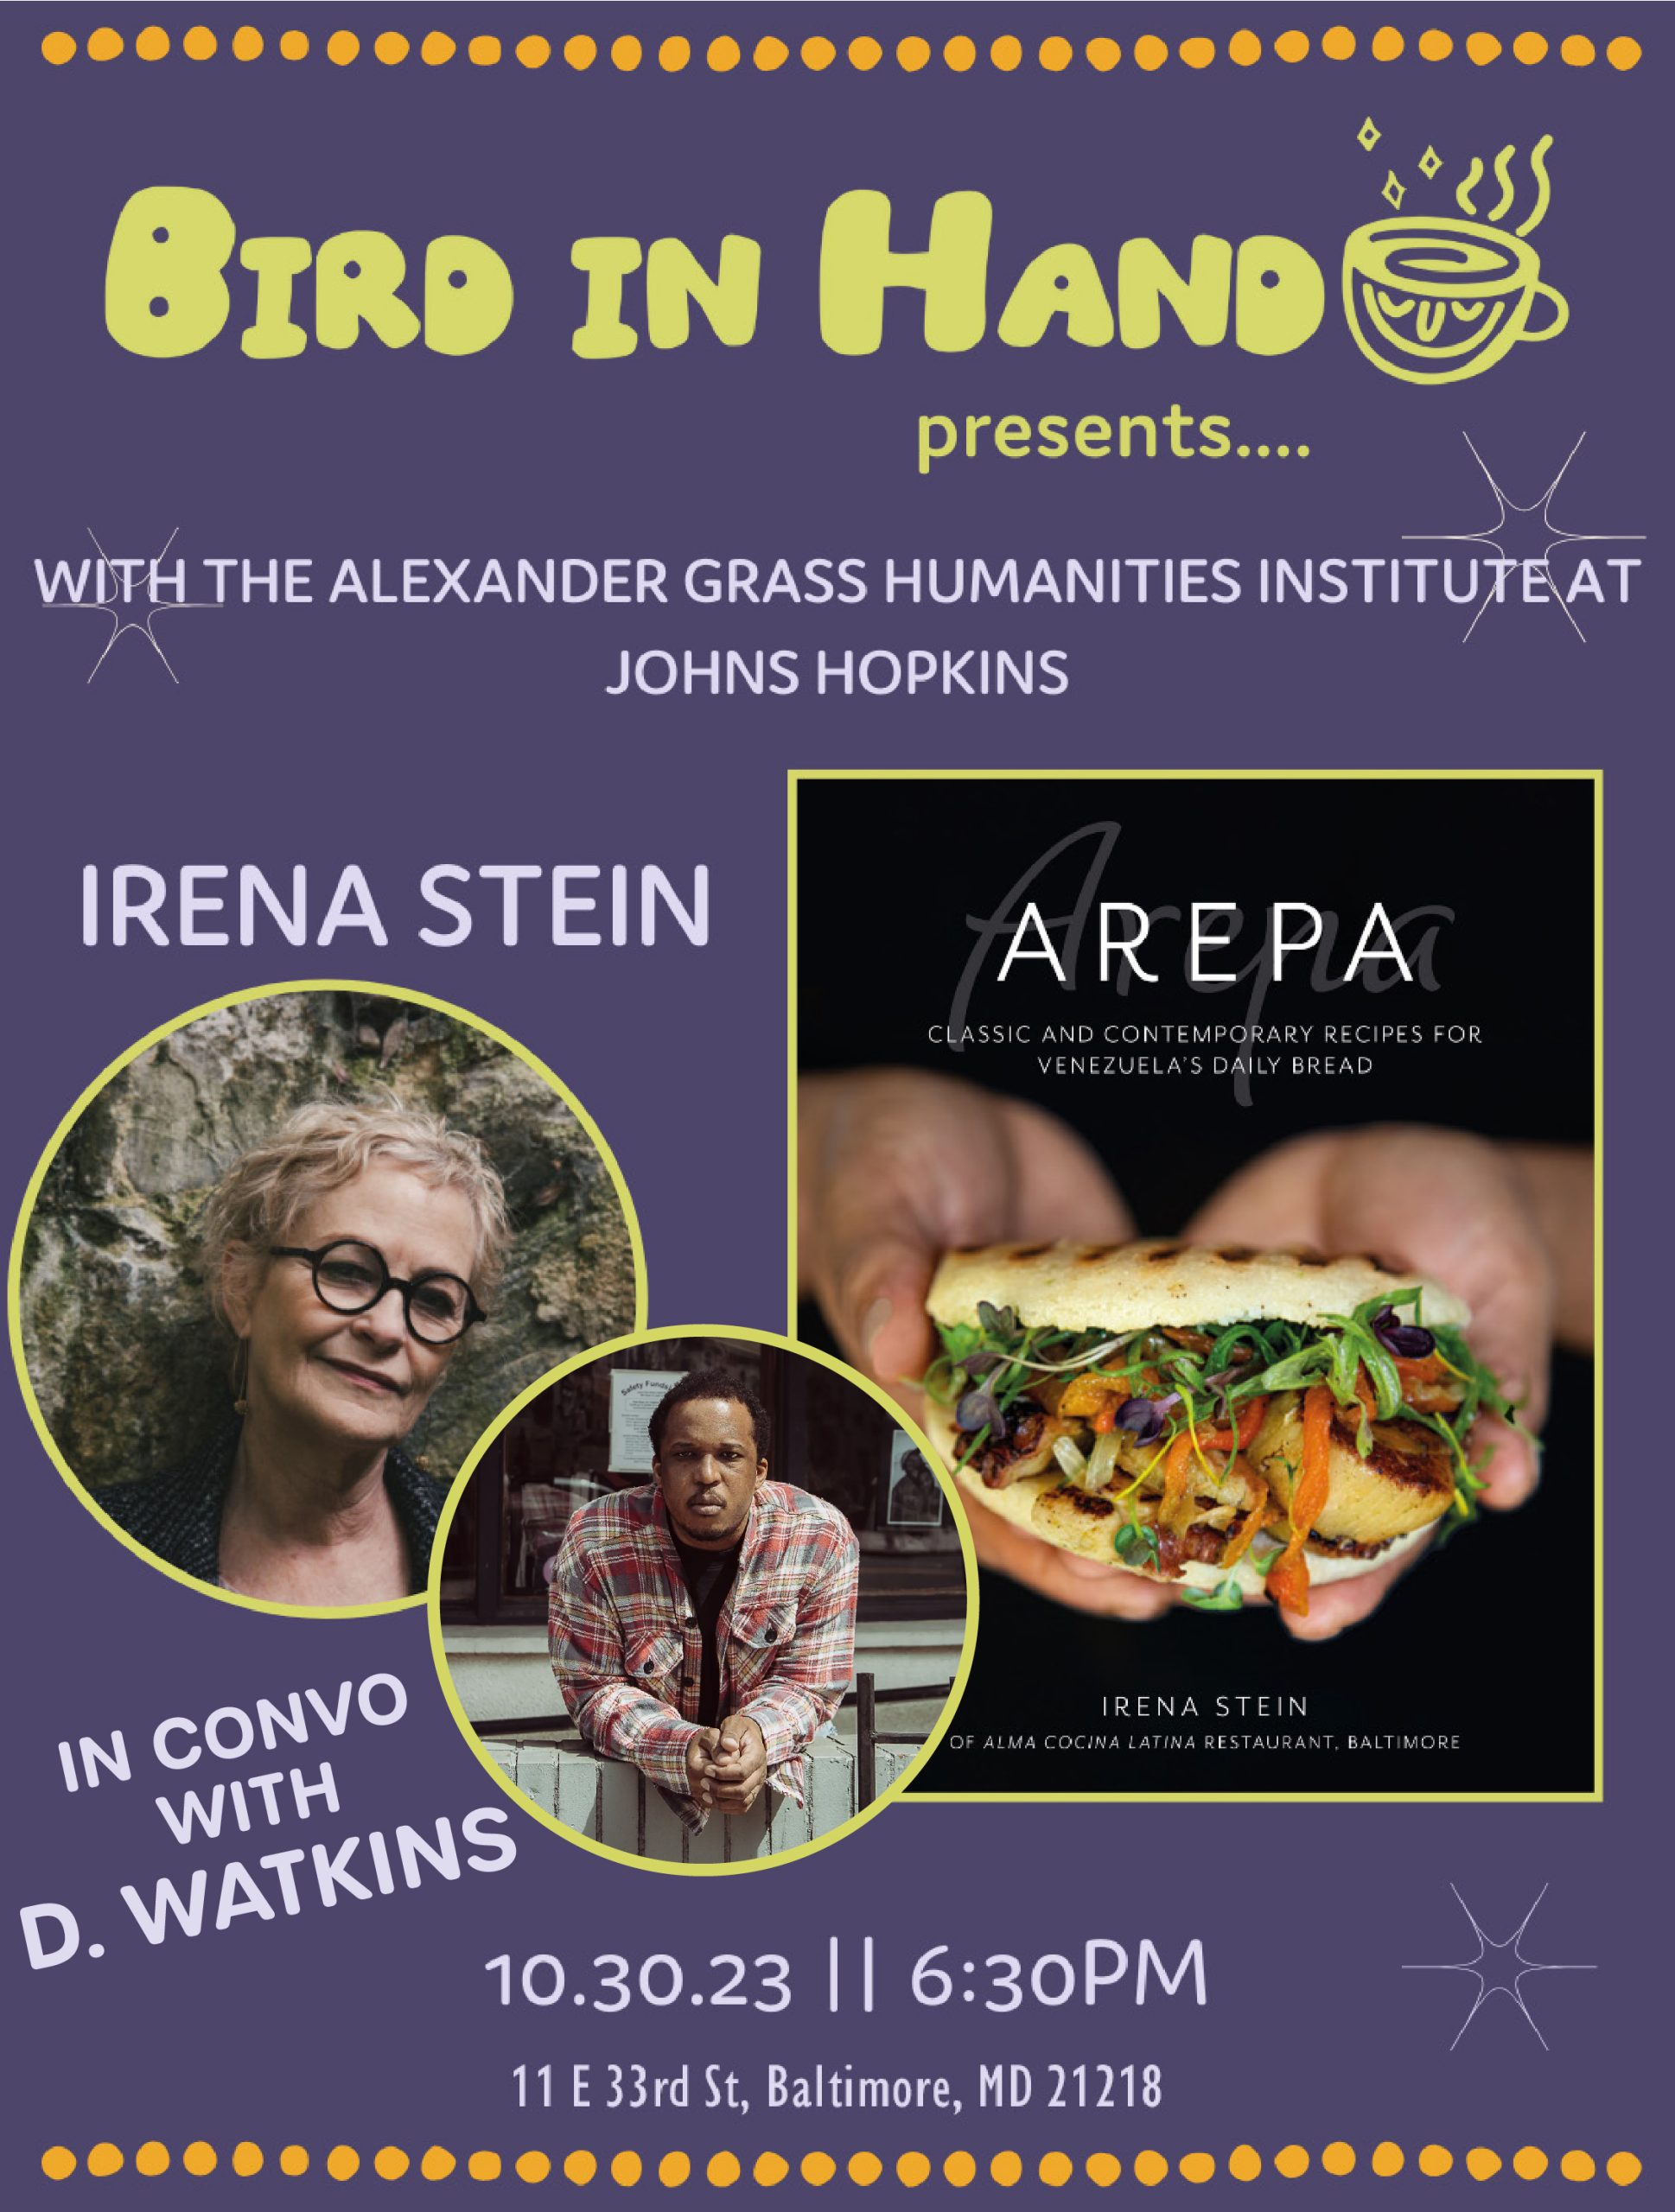 Poster for "Arepa" talk at Bird in Hand featuring speakers Irena Stein and D. Watkins on October 30th.